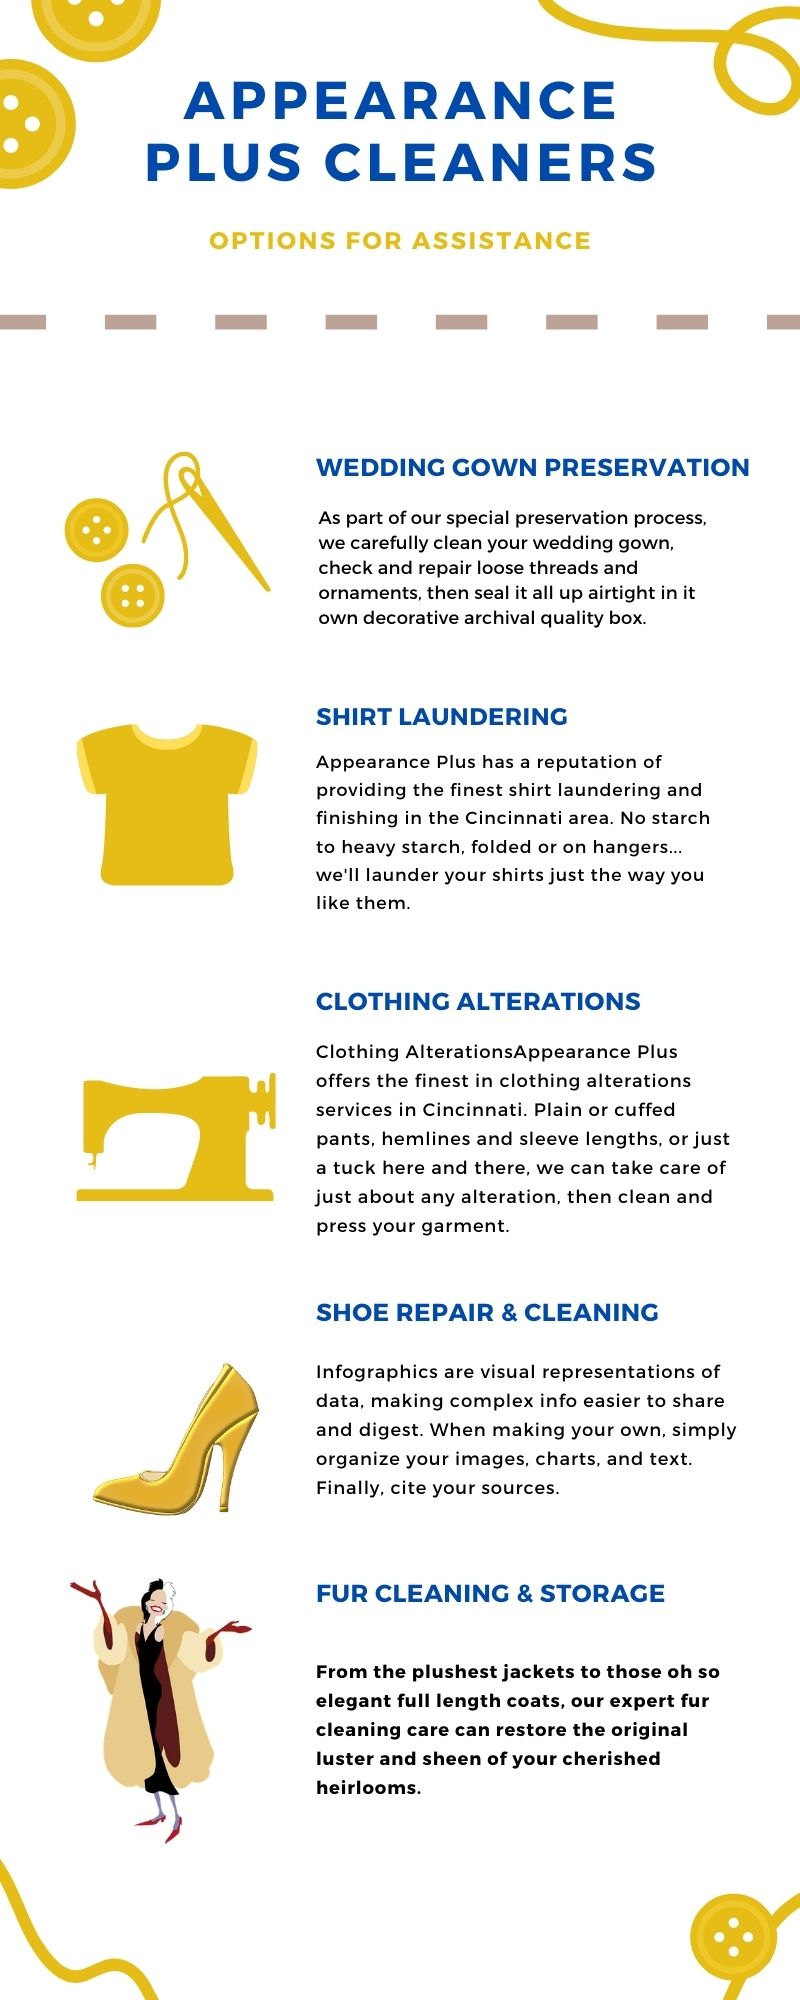 alterations, fur cleaning, wedding dress preservation, shirt laundering  